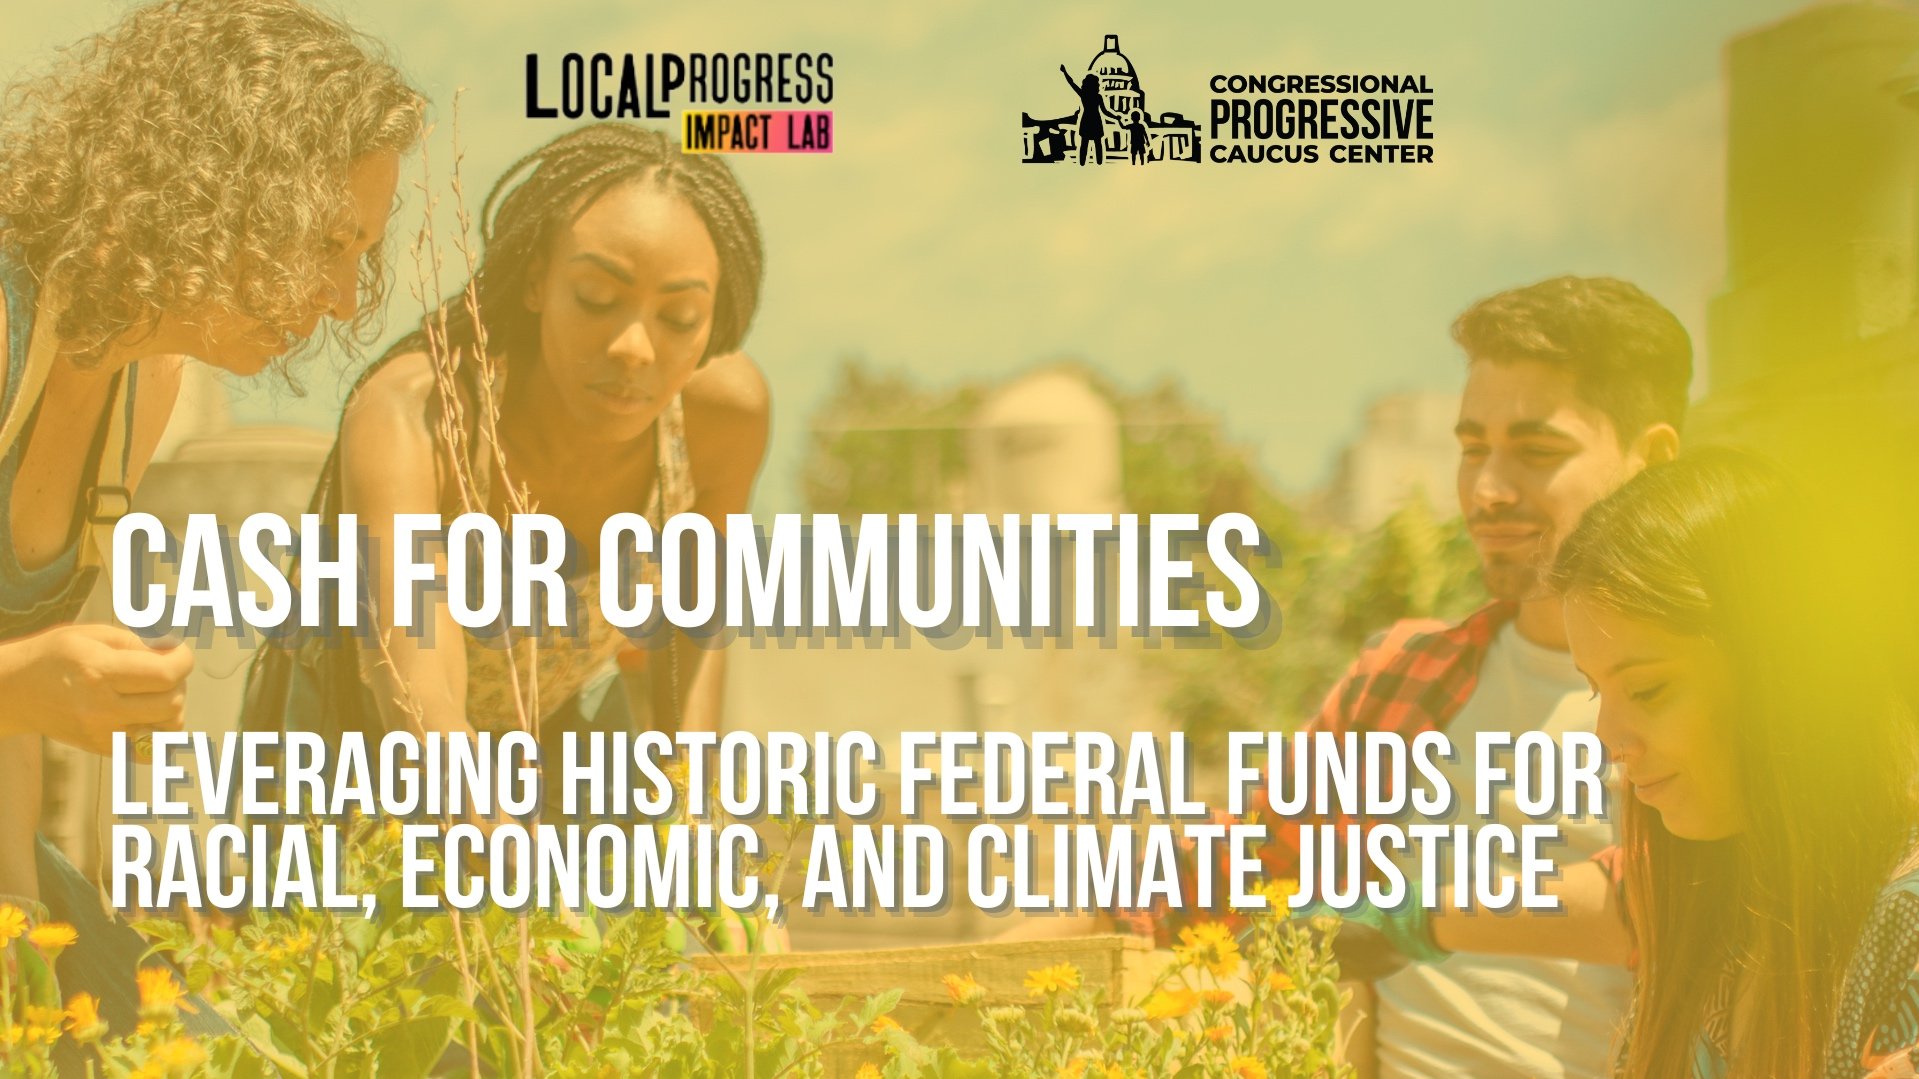 Cash for Communities: Leveraging Historic Federal Funds for Racial, Economic, and Climate Justice